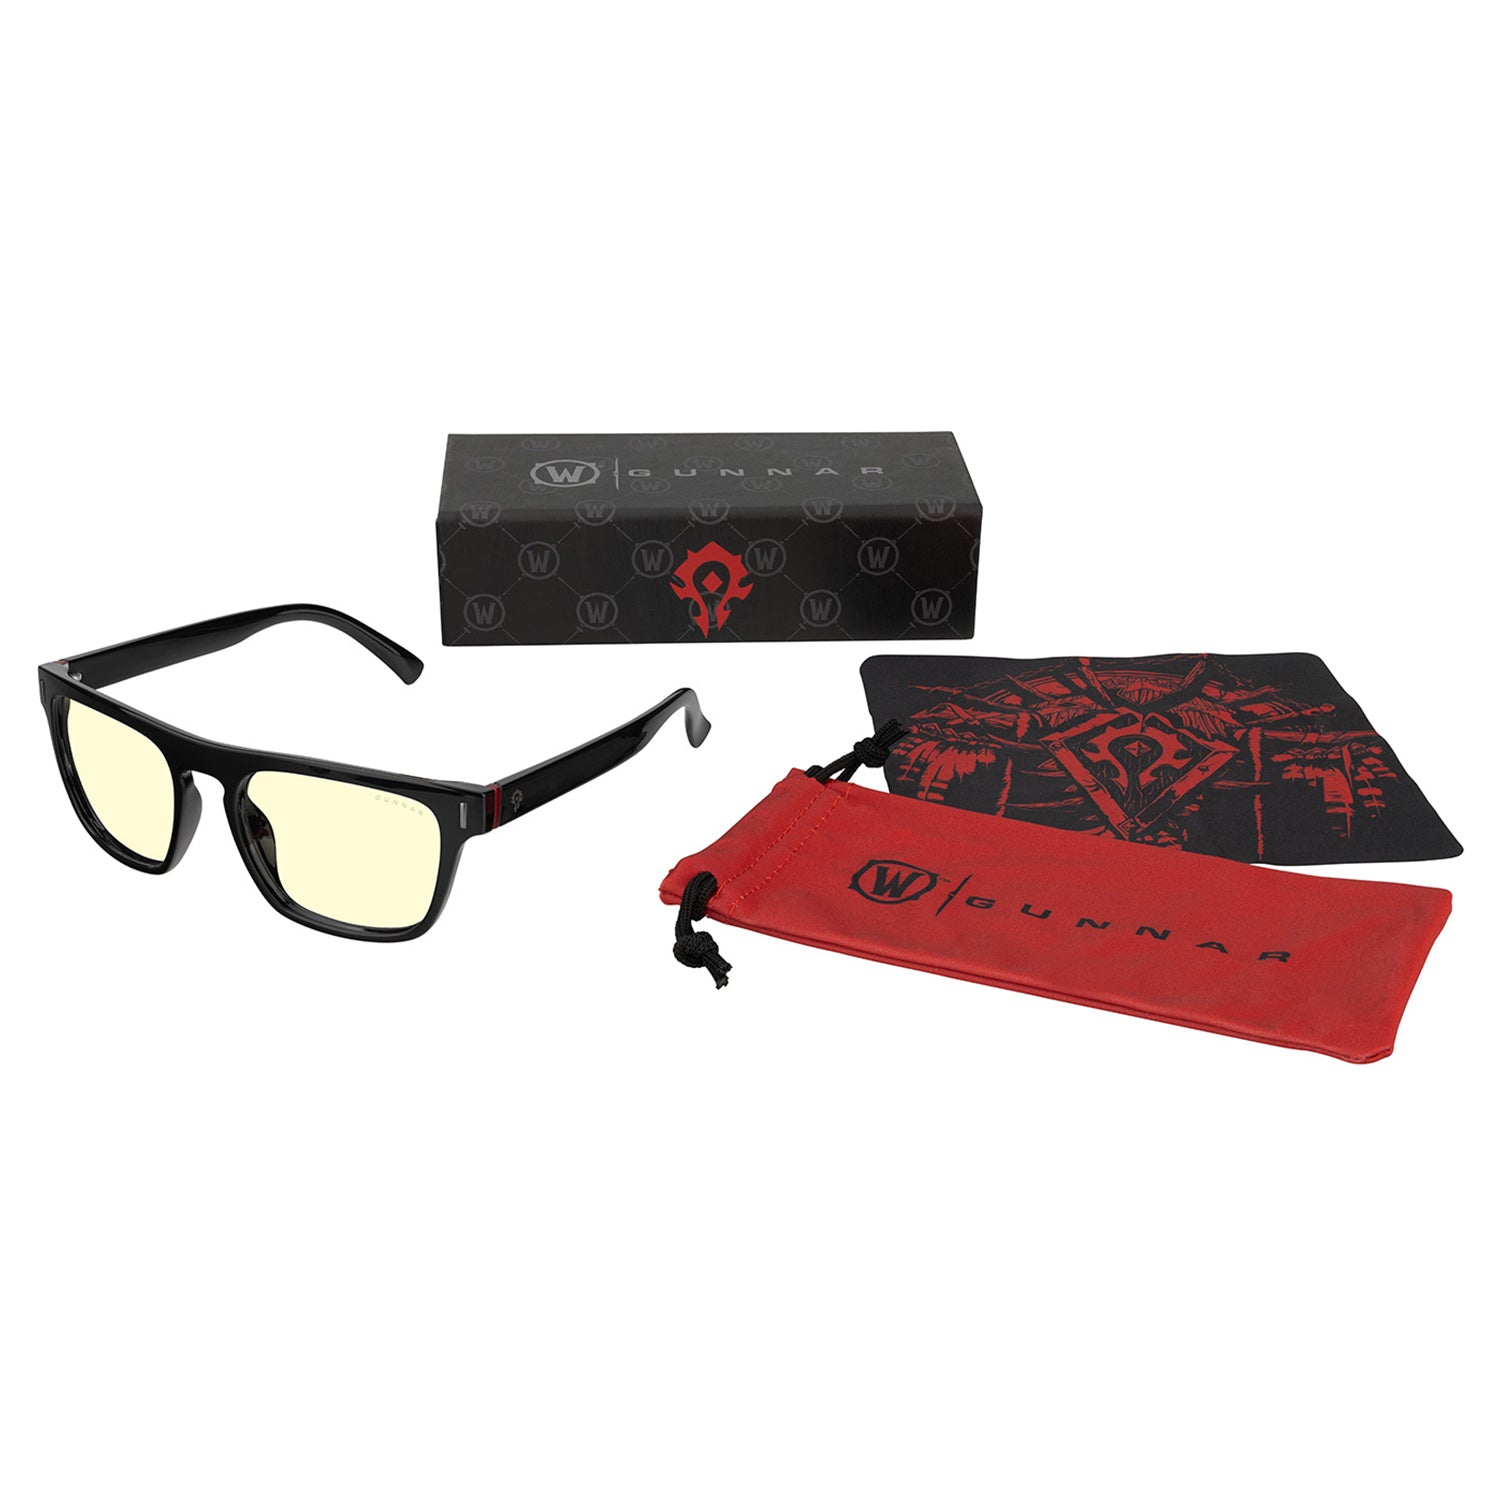 World of Warcraft Horde Gunnar Blue Light Glasses - Front View with Packaging